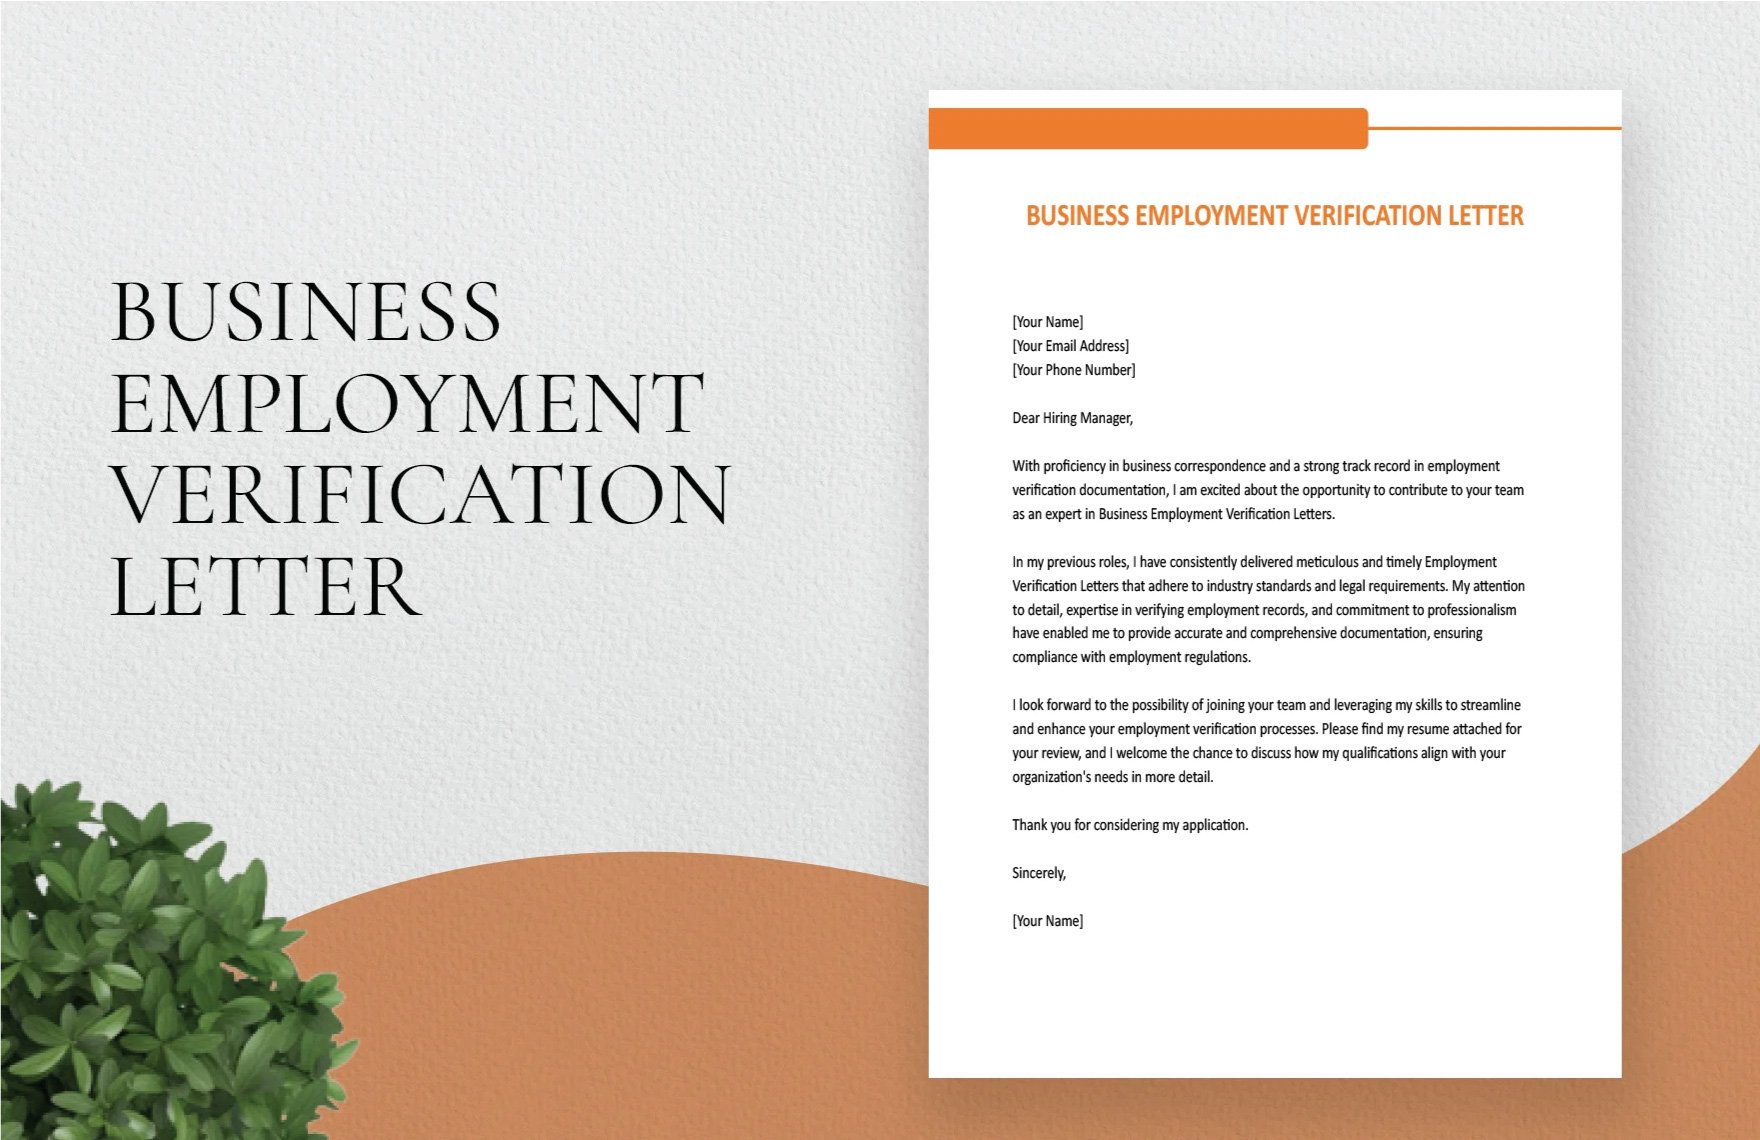 Free Business Employment Verification Letter in Word, Google Docs